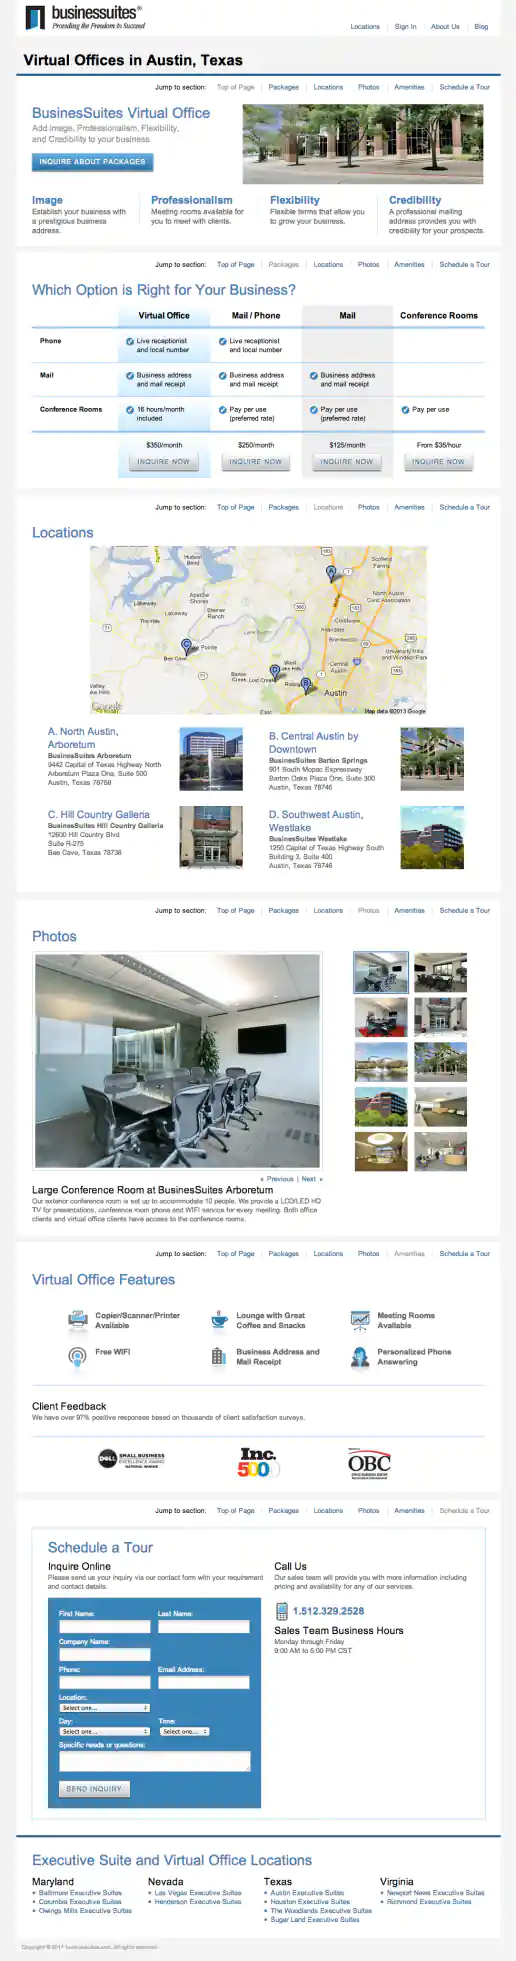 Virtual Offices Page - version 2 project image